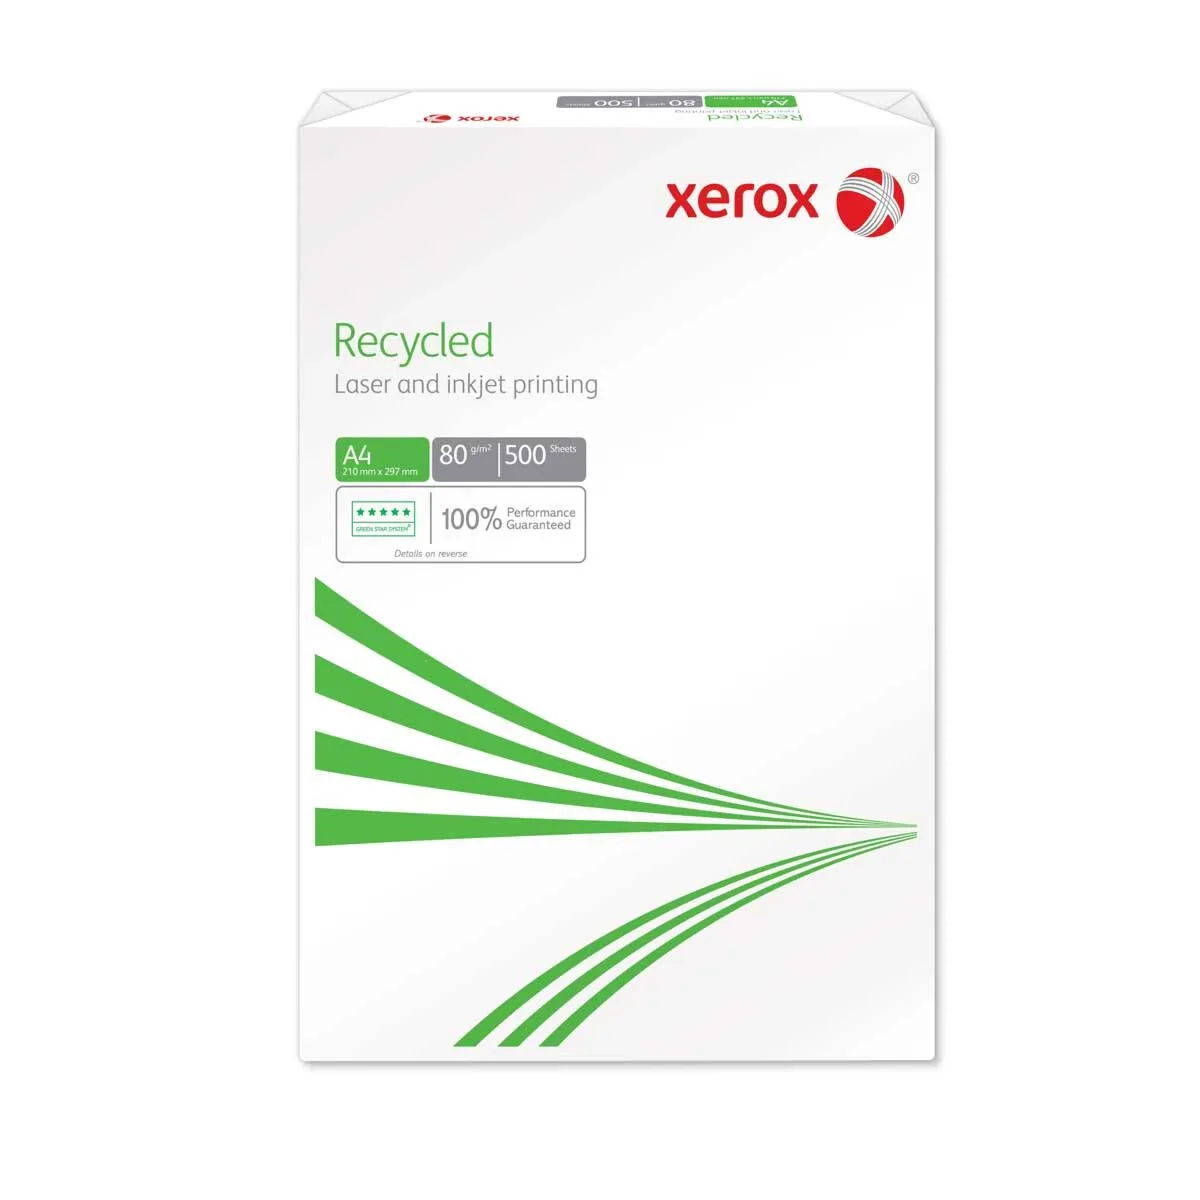 xerox recycled paper